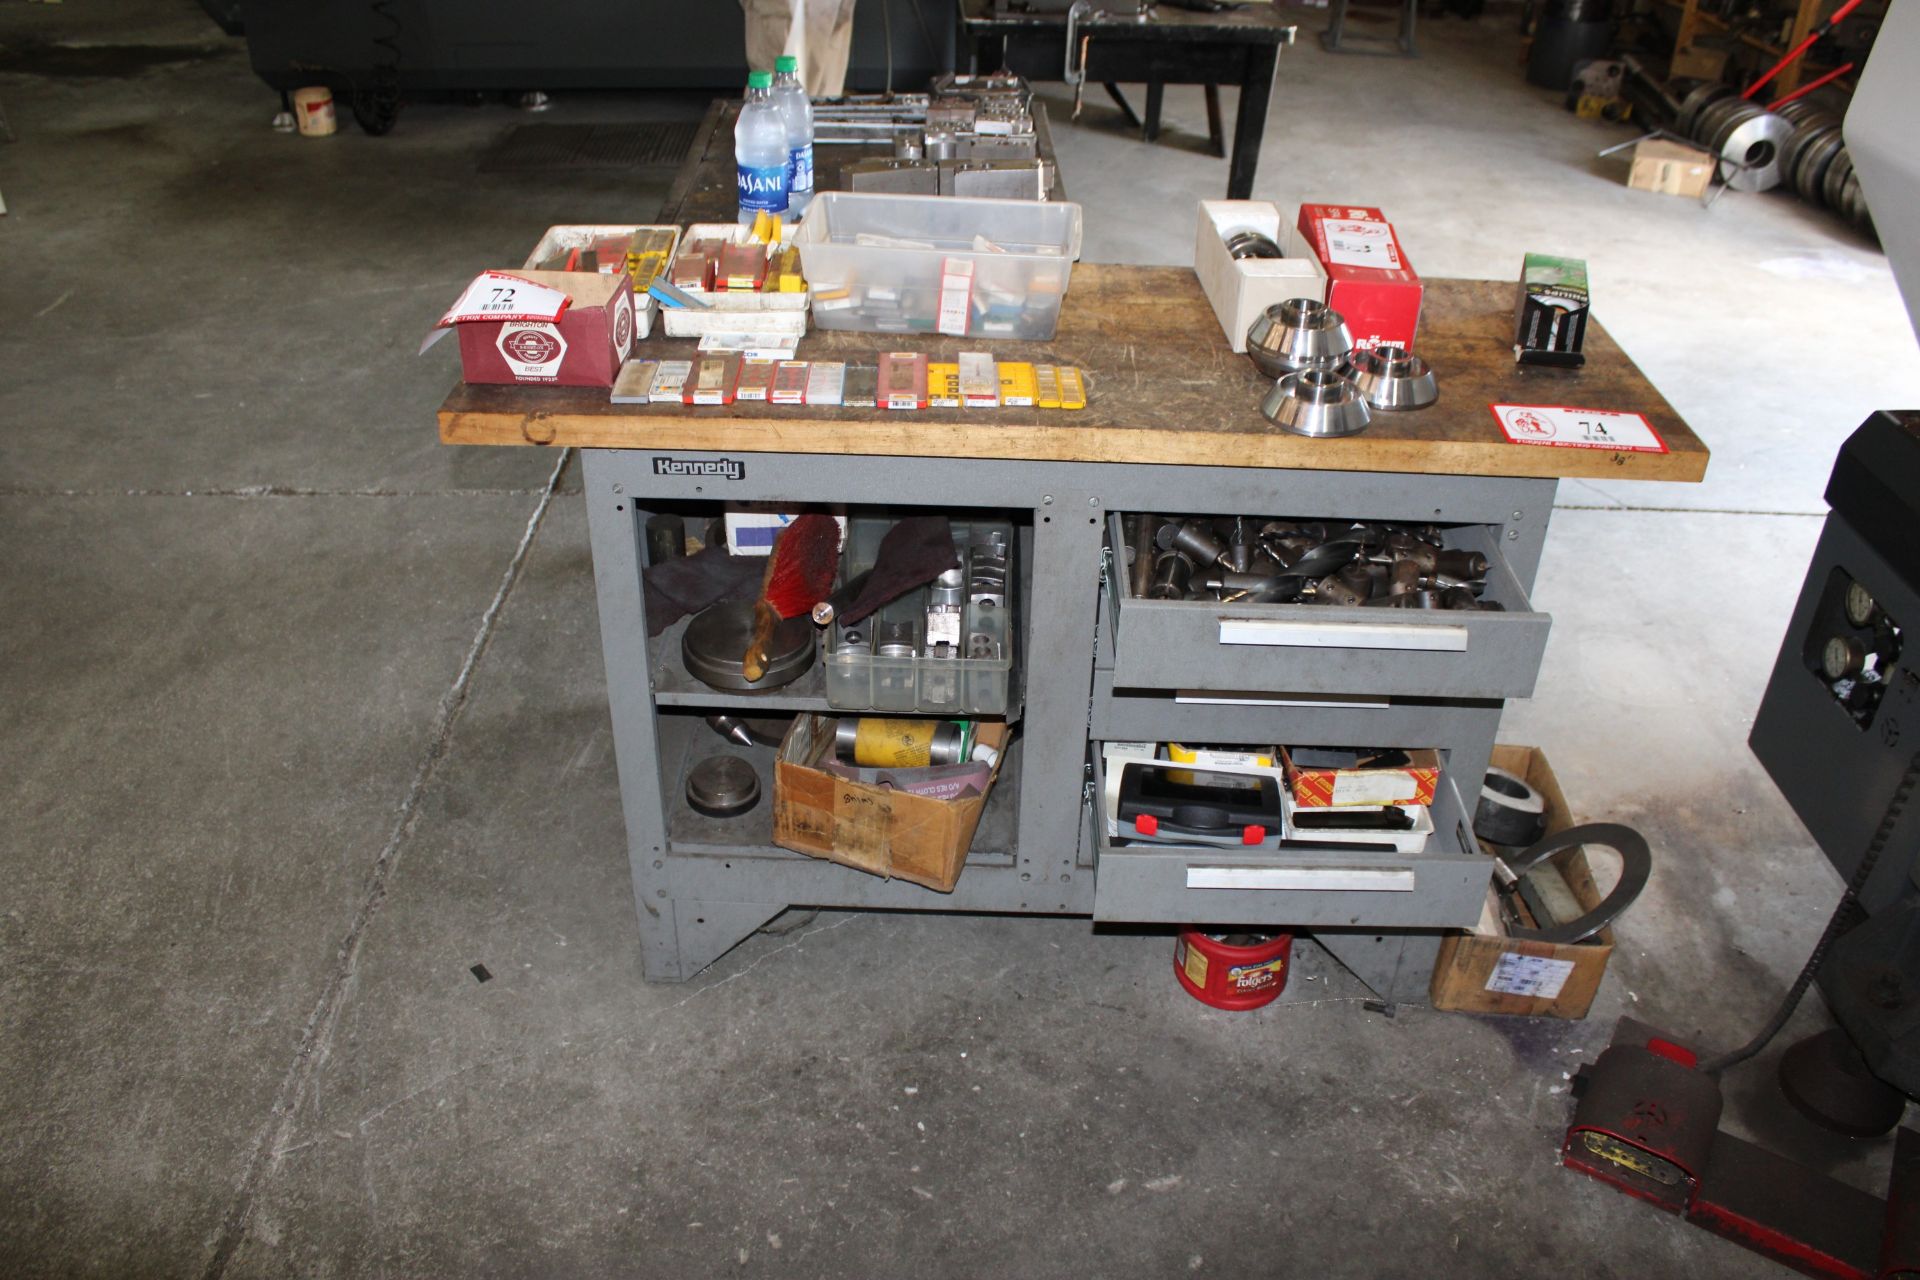 Cabinet & Contents: Various Chuck Jaws, Drill Bits, Tool Holders, Boring Bars, Etc.